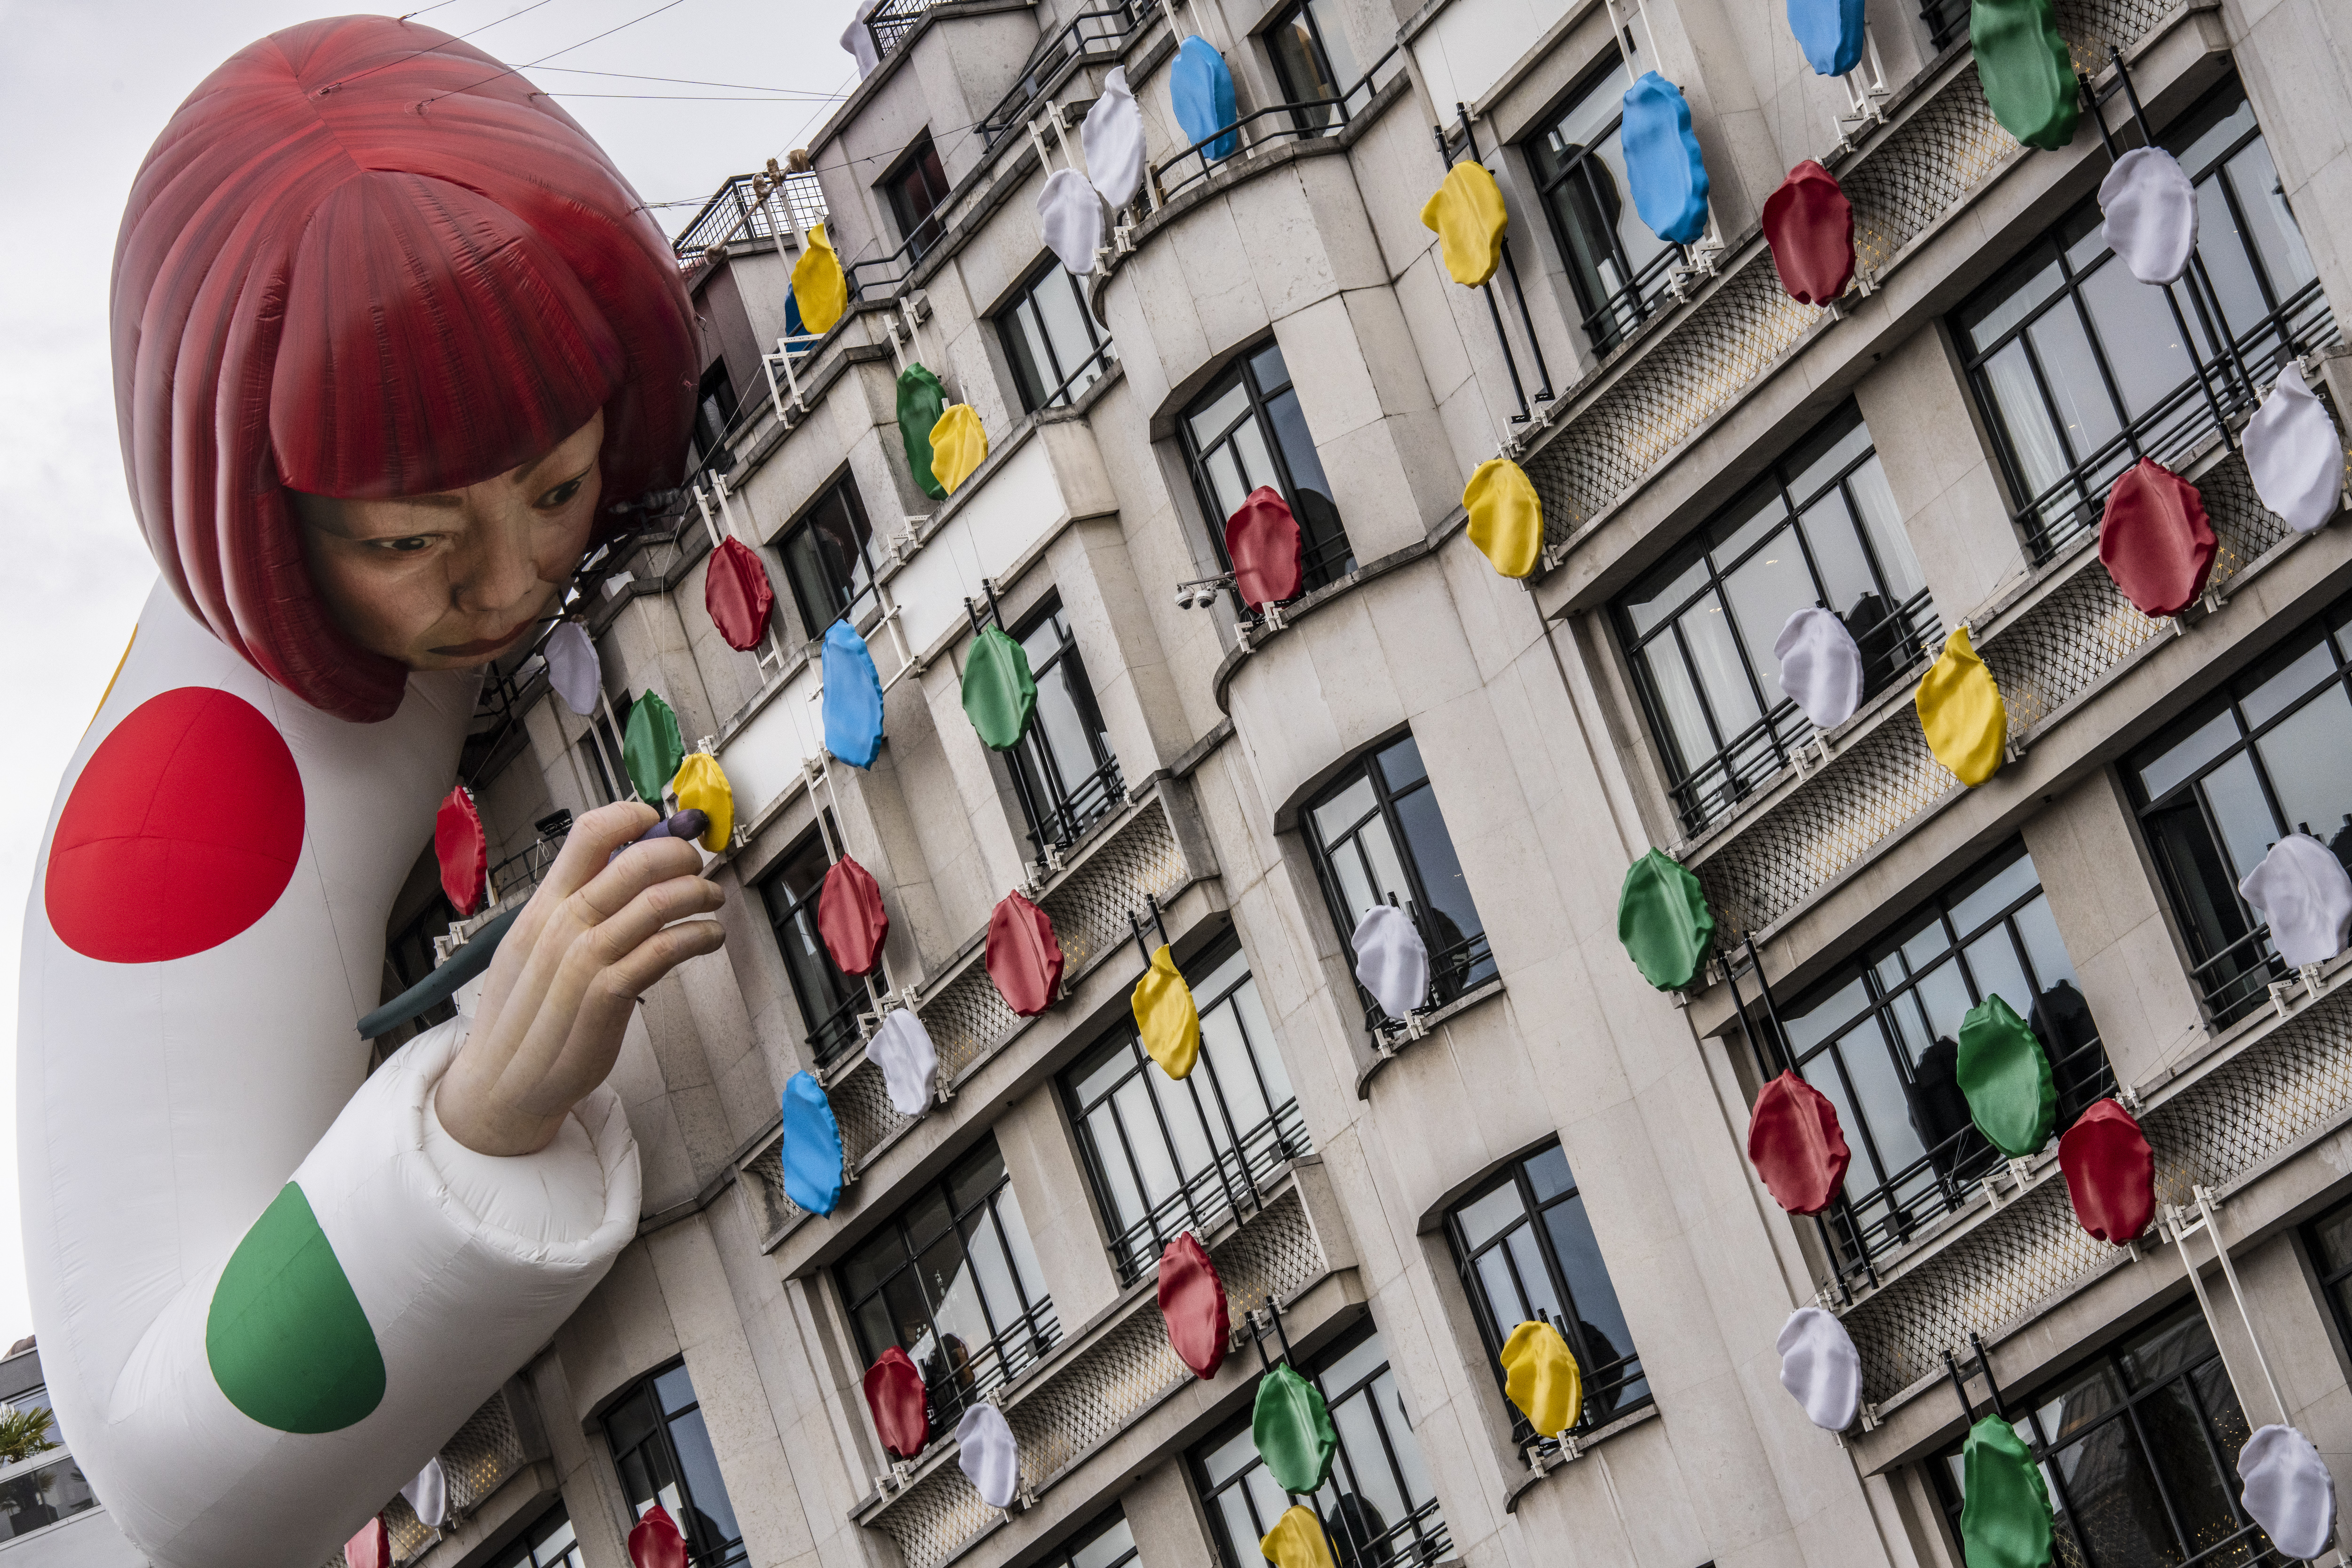 Yayoi Kusama collaborates with Veuve Clicquot at Louis Vuitton